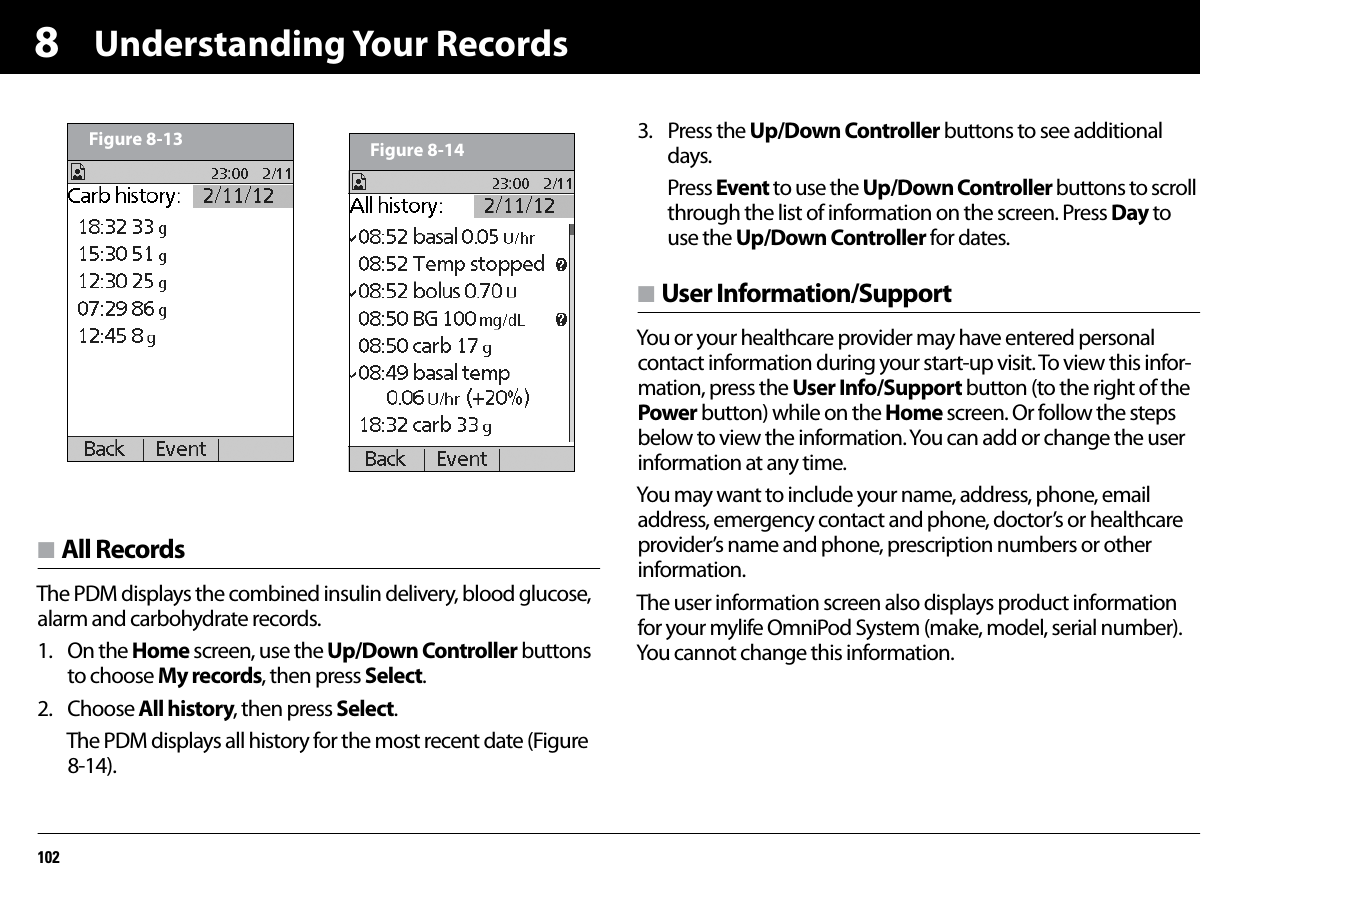 Understanding Your Records1028n All RecordsThe PDM displays the combined insulin delivery, blood glucose, alarm and carbohydrate records.1. On the Home screen, use the Up/Down Controller buttons to choose My records, then press Select.2. Choose All history, then press Select.The PDM displays all history for the most recent date (Figure 8-14).3. Press the Up/Down Controller buttons to see additional days.Press Event to use the Up/Down Controller buttons to scroll through the list of information on the screen. Press Day to use the Up/Down Controller for dates.n User Information/SupportYou or your healthcare provider may have entered personal contact information during your start-up visit. To view this infor-mation, press the User Info/Support button (to the right of the Power button) while on the Home screen. Or follow the steps below to view the information. You can add or change the user information at any time.You may want to include your name, address, phone, email address, emergency contact and phone, doctor’s or healthcare provider’s name and phone, prescription numbers or other information.The user information screen also displays product information for your mylife OmniPod System (make, model, serial number). You cannot change this information.Figure 8-13 Figure 8-14